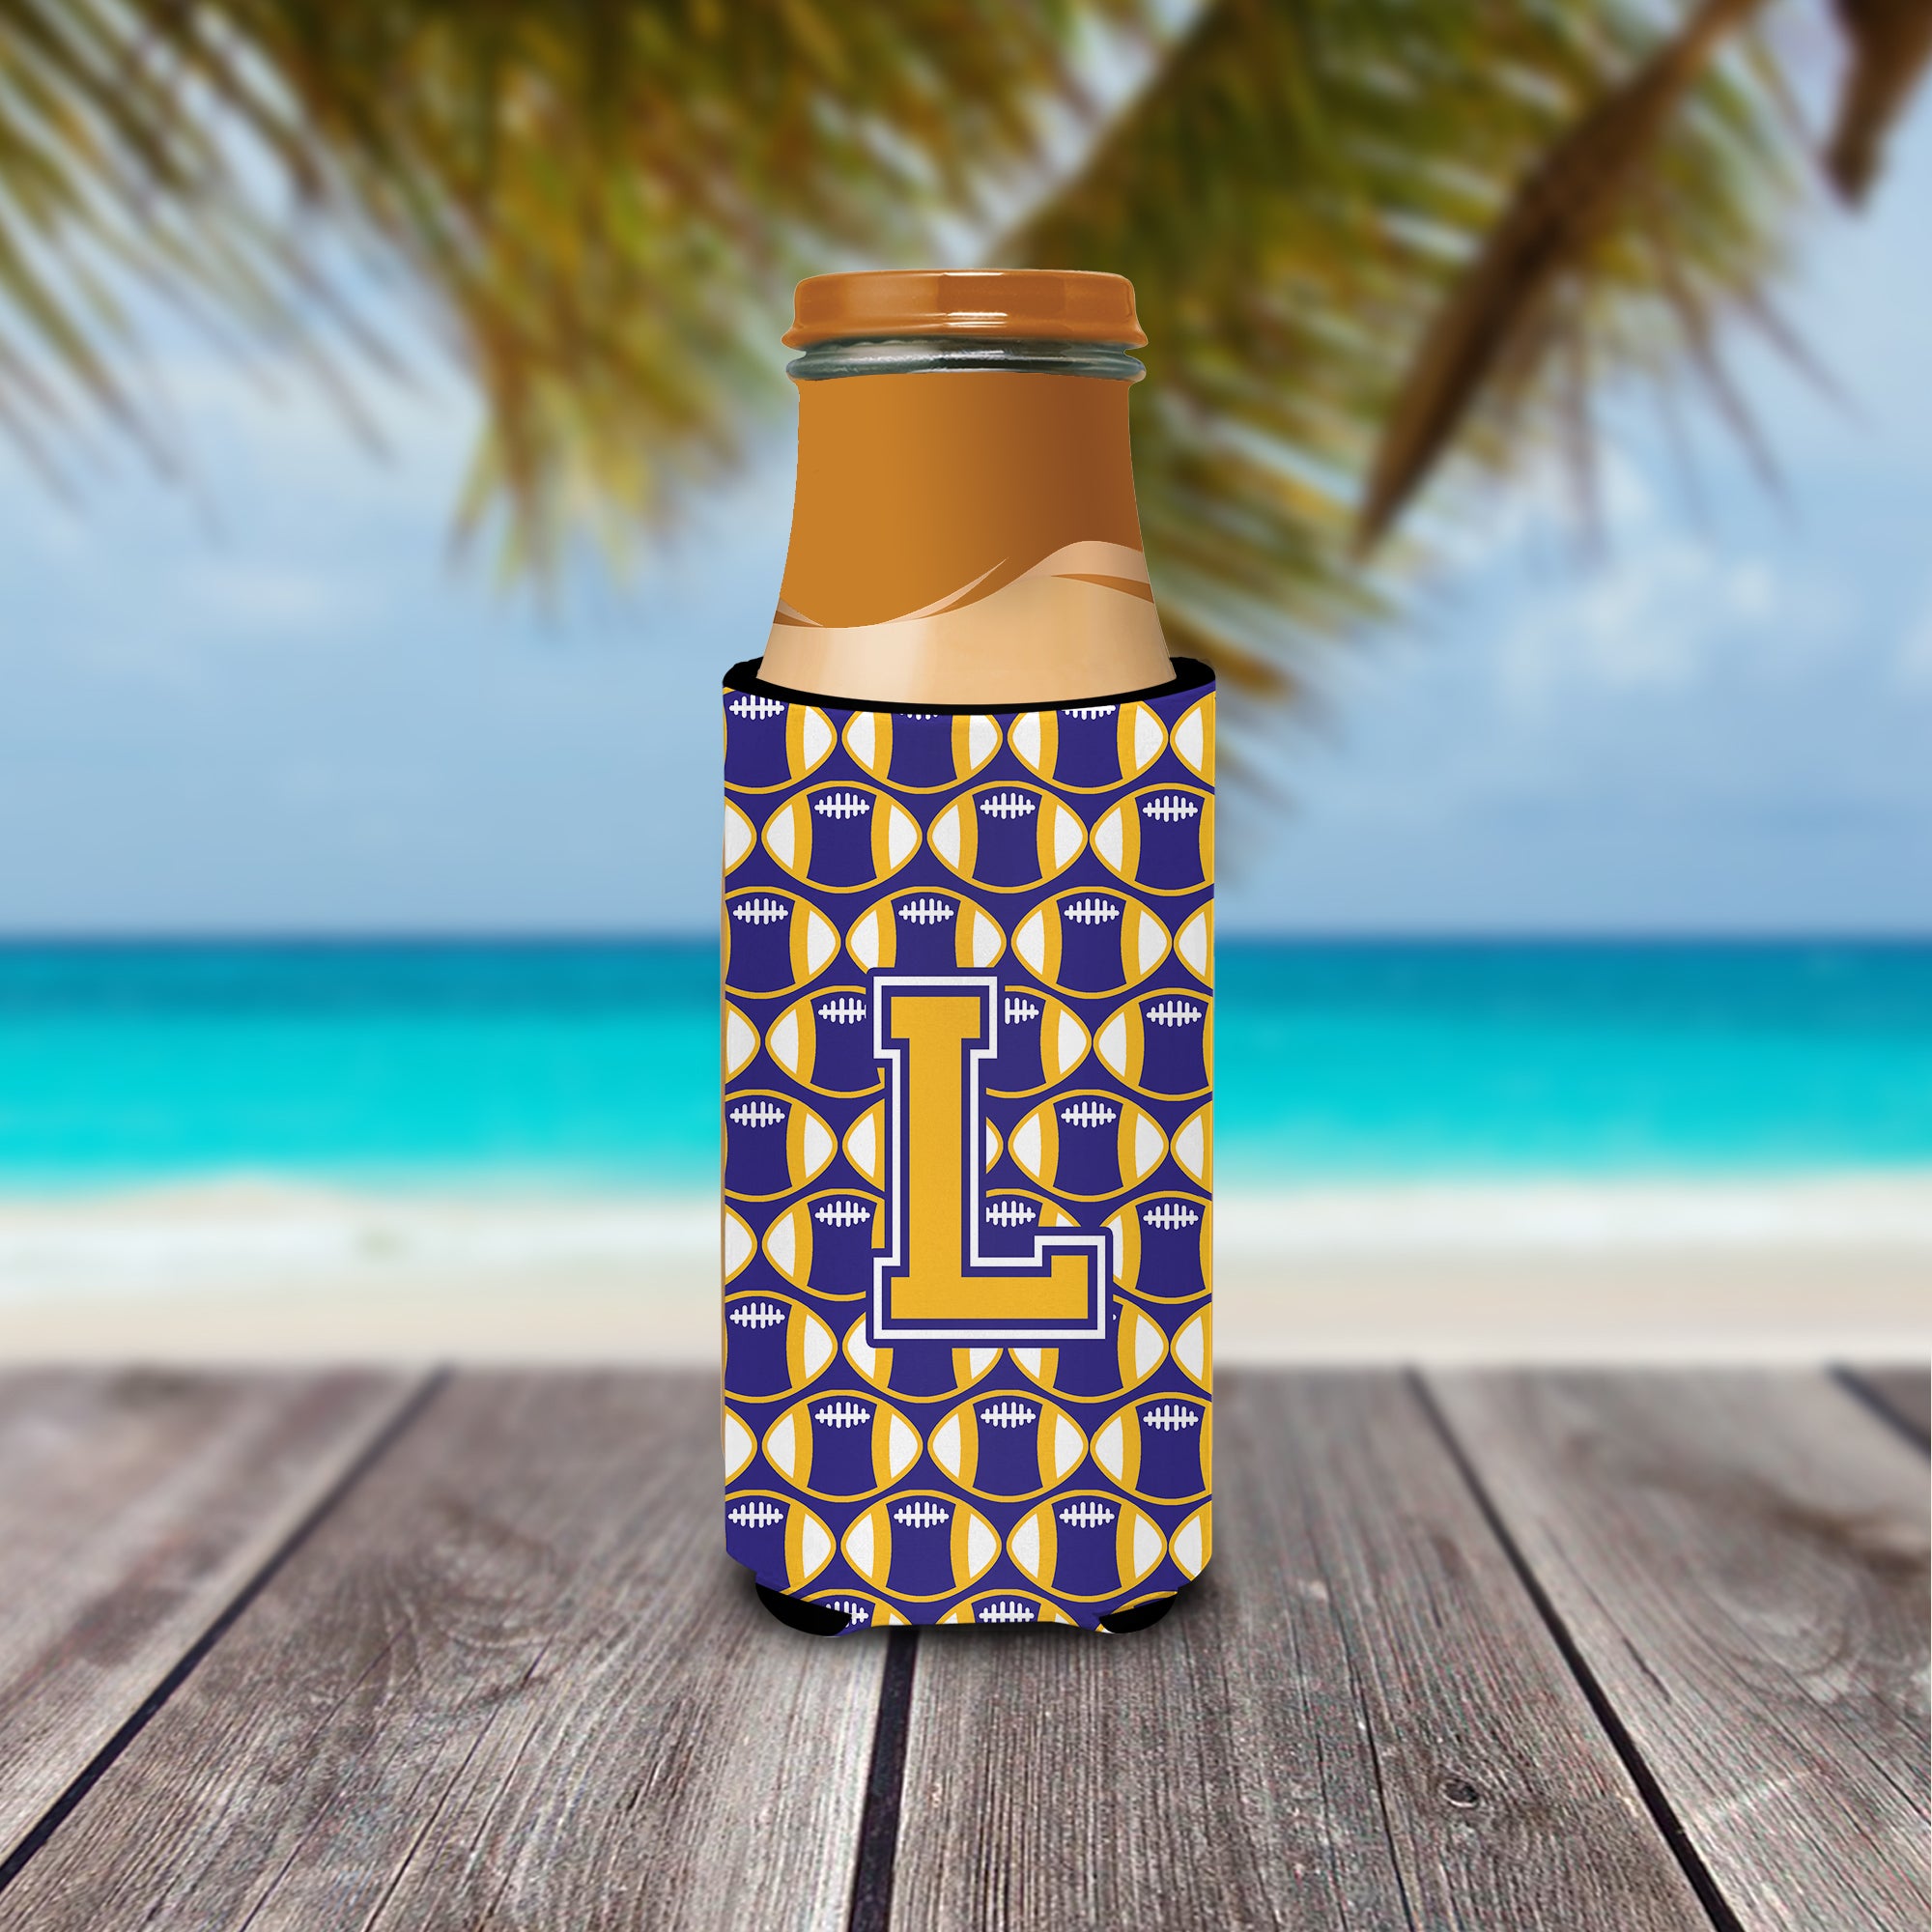 Letter L Football Purple and Gold Ultra Beverage Insulators for slim cans CJ1064-LMUK